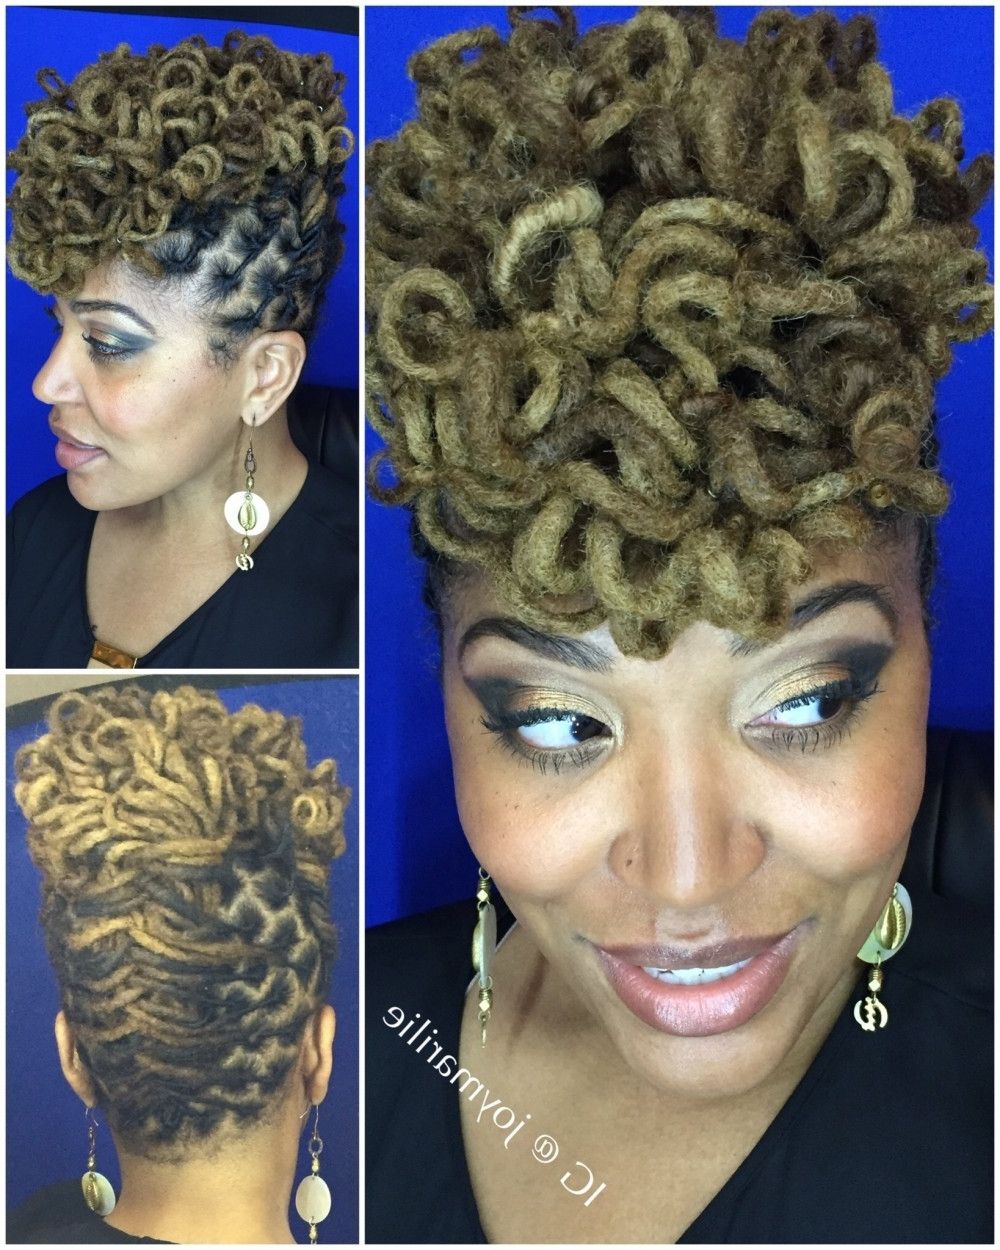 Excellent Loc Updo Hairstyles: Curly Loc Pompadour My Loc Styles And Pertaining To Lock Updo Hairstyles (View 13 of 15)